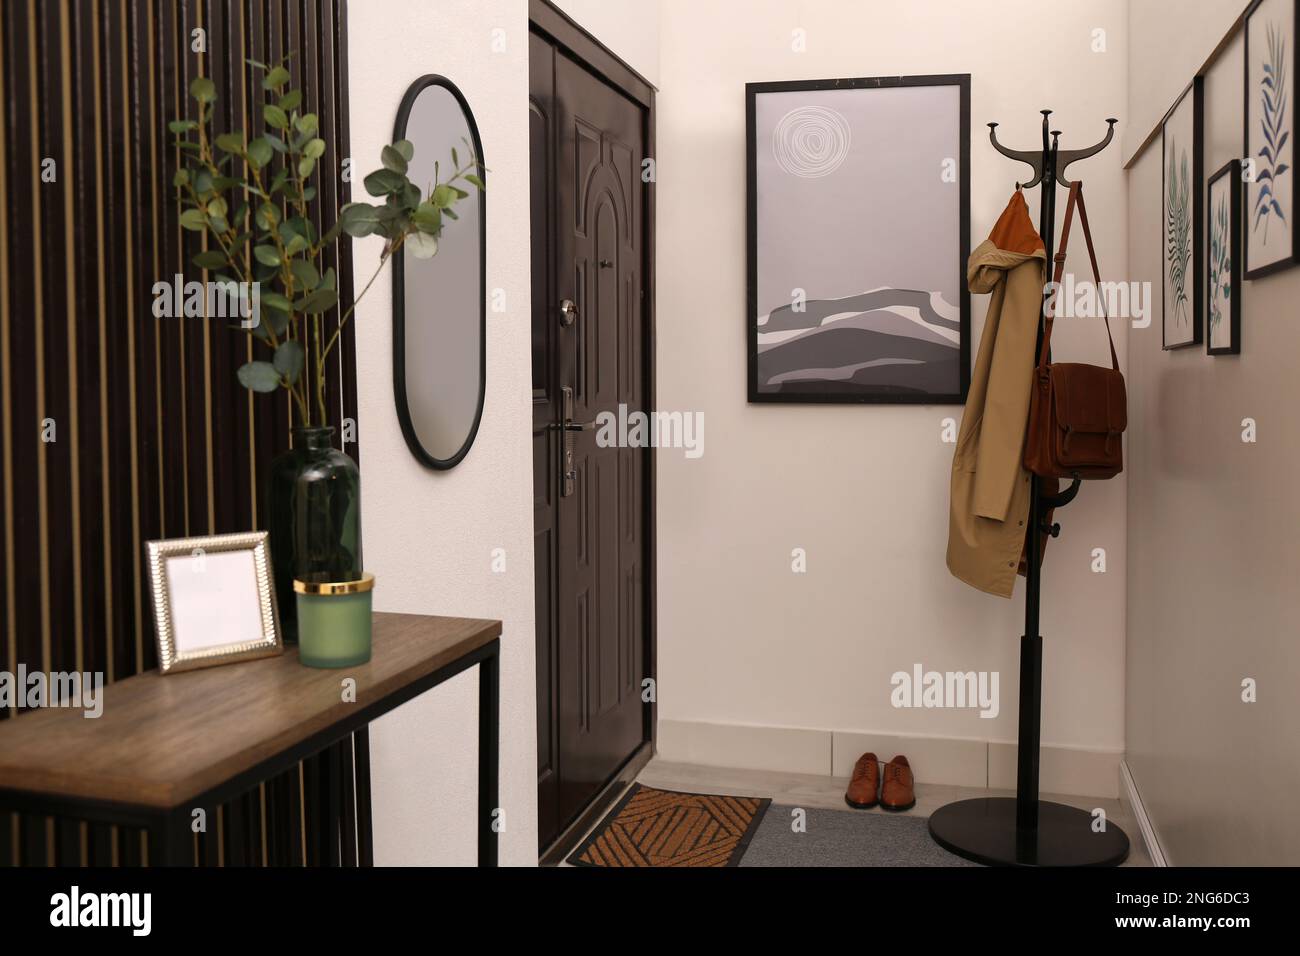 Modern hallway interior with stylish furniture and paintings Stock Photo